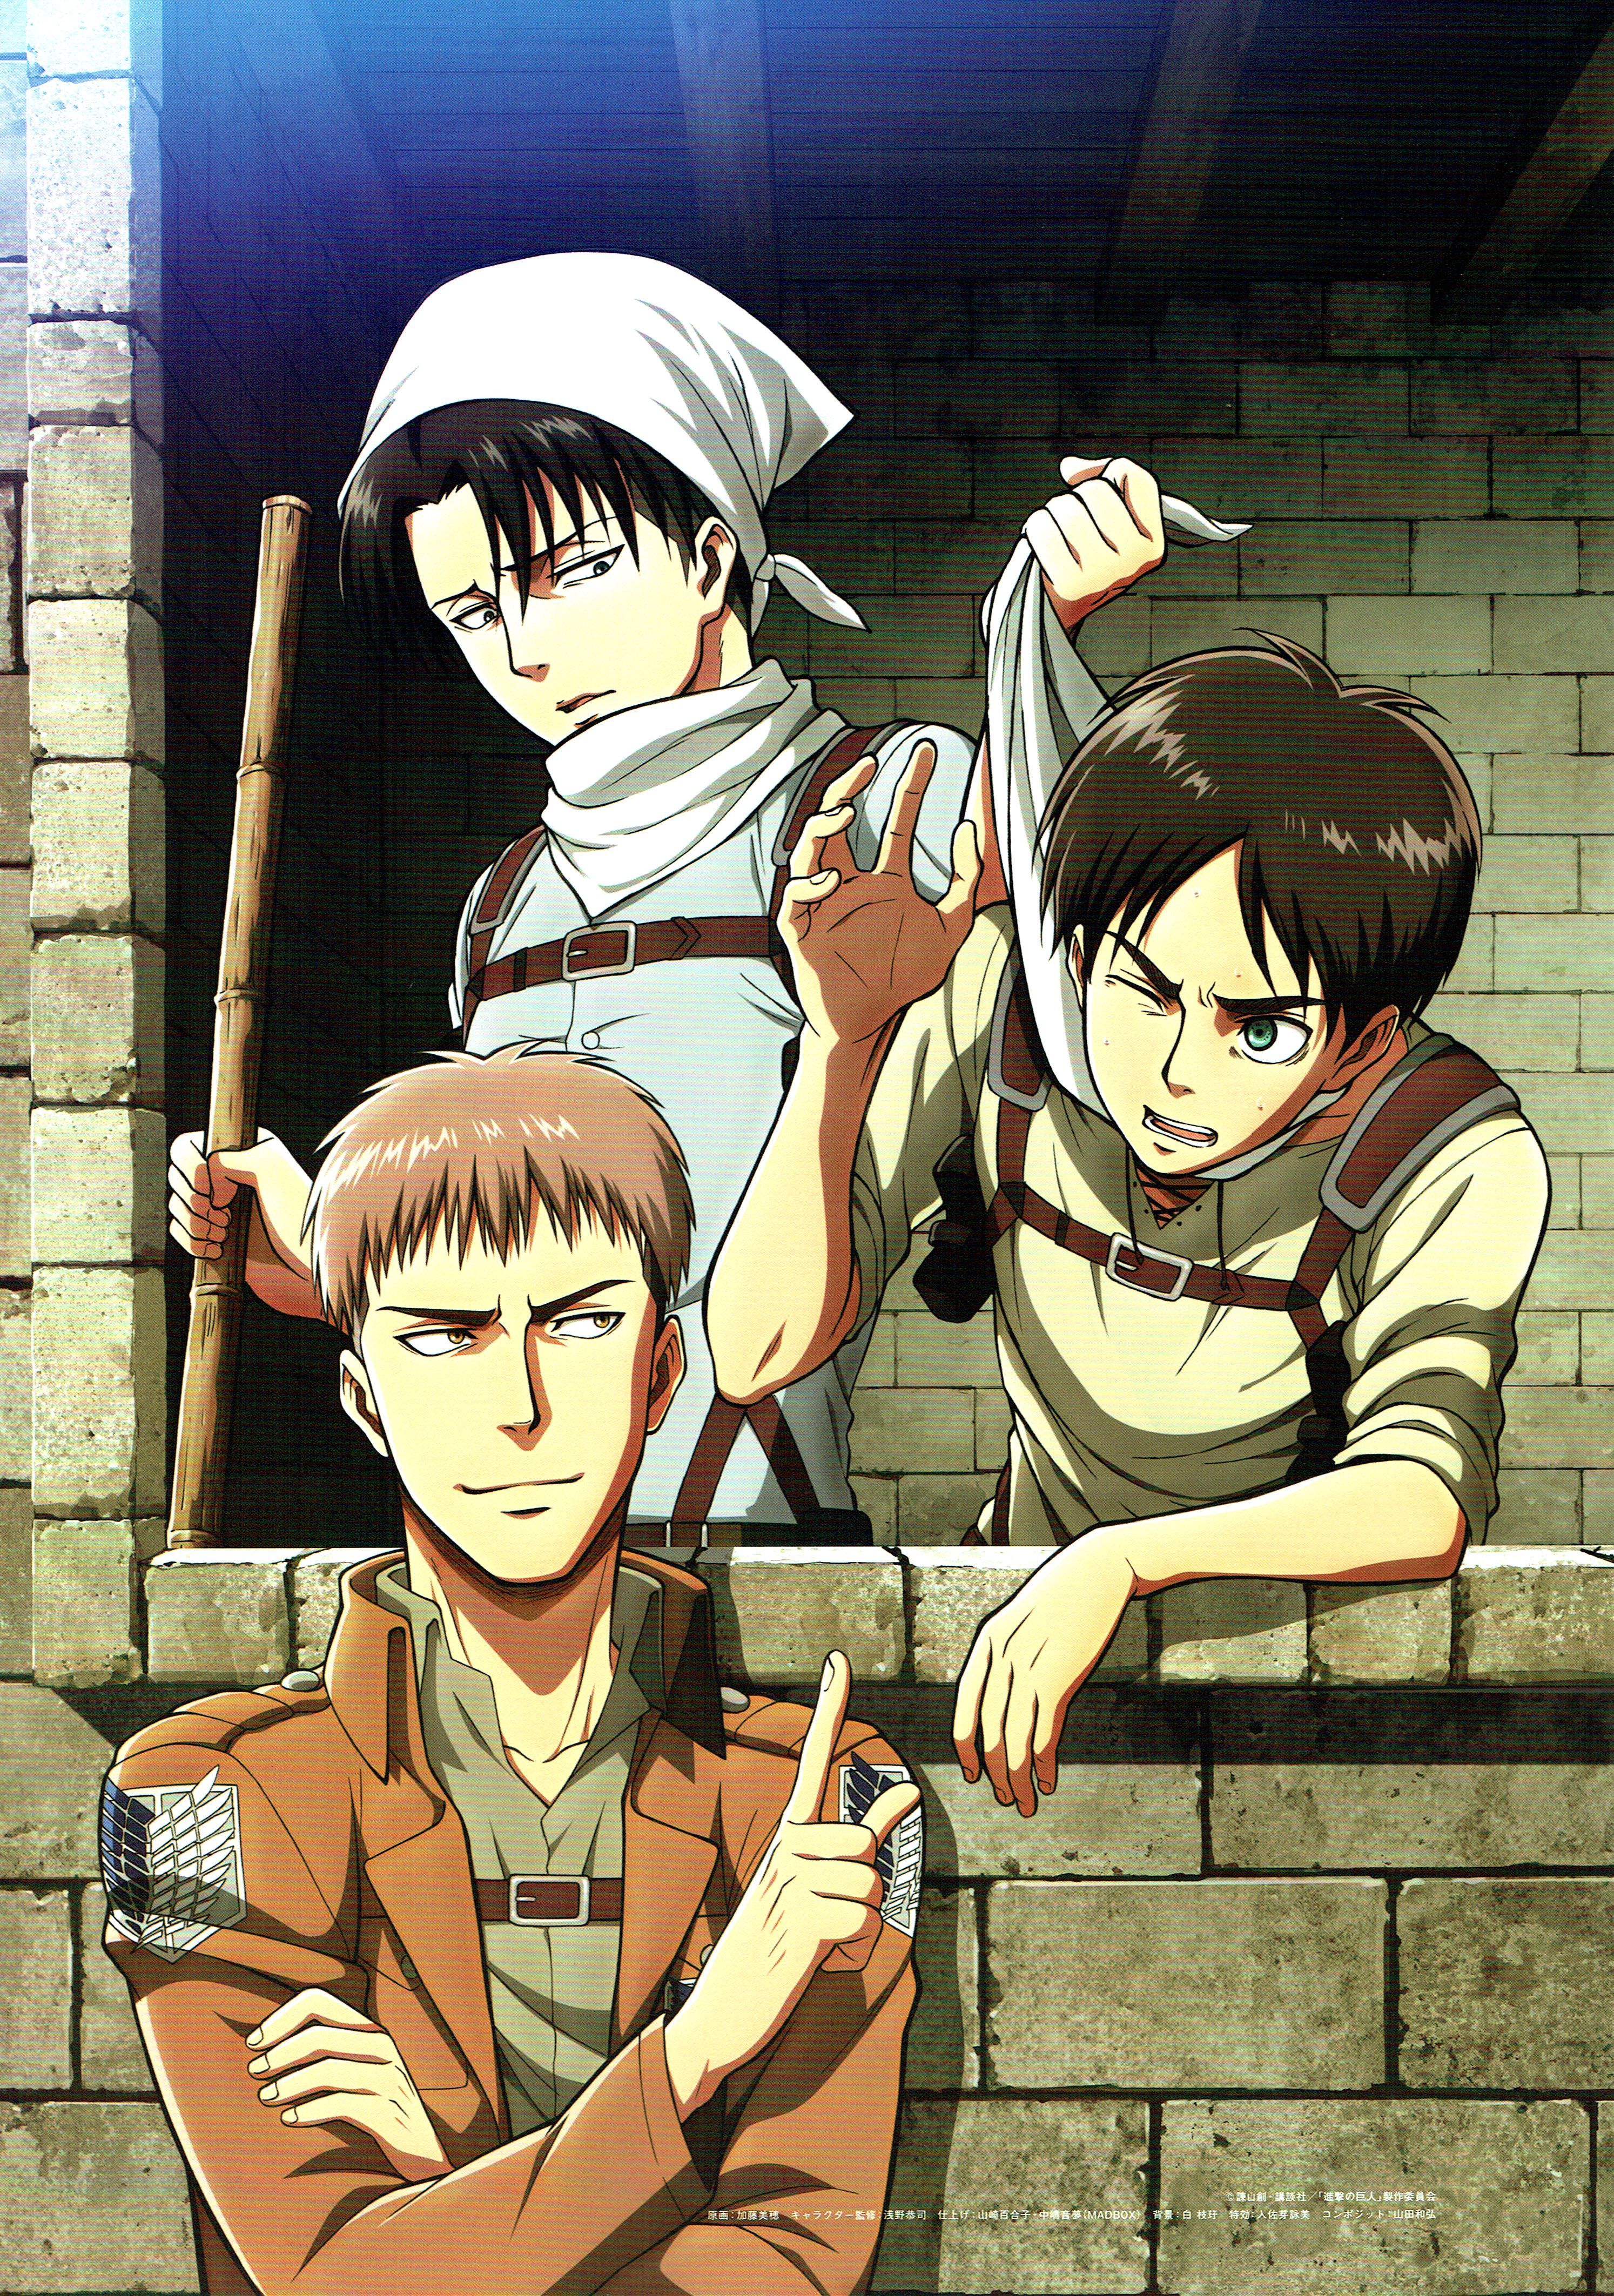 Rivaille, Eren and Jean. Attack on titan jean, Attack on titan, Attack on titan anime